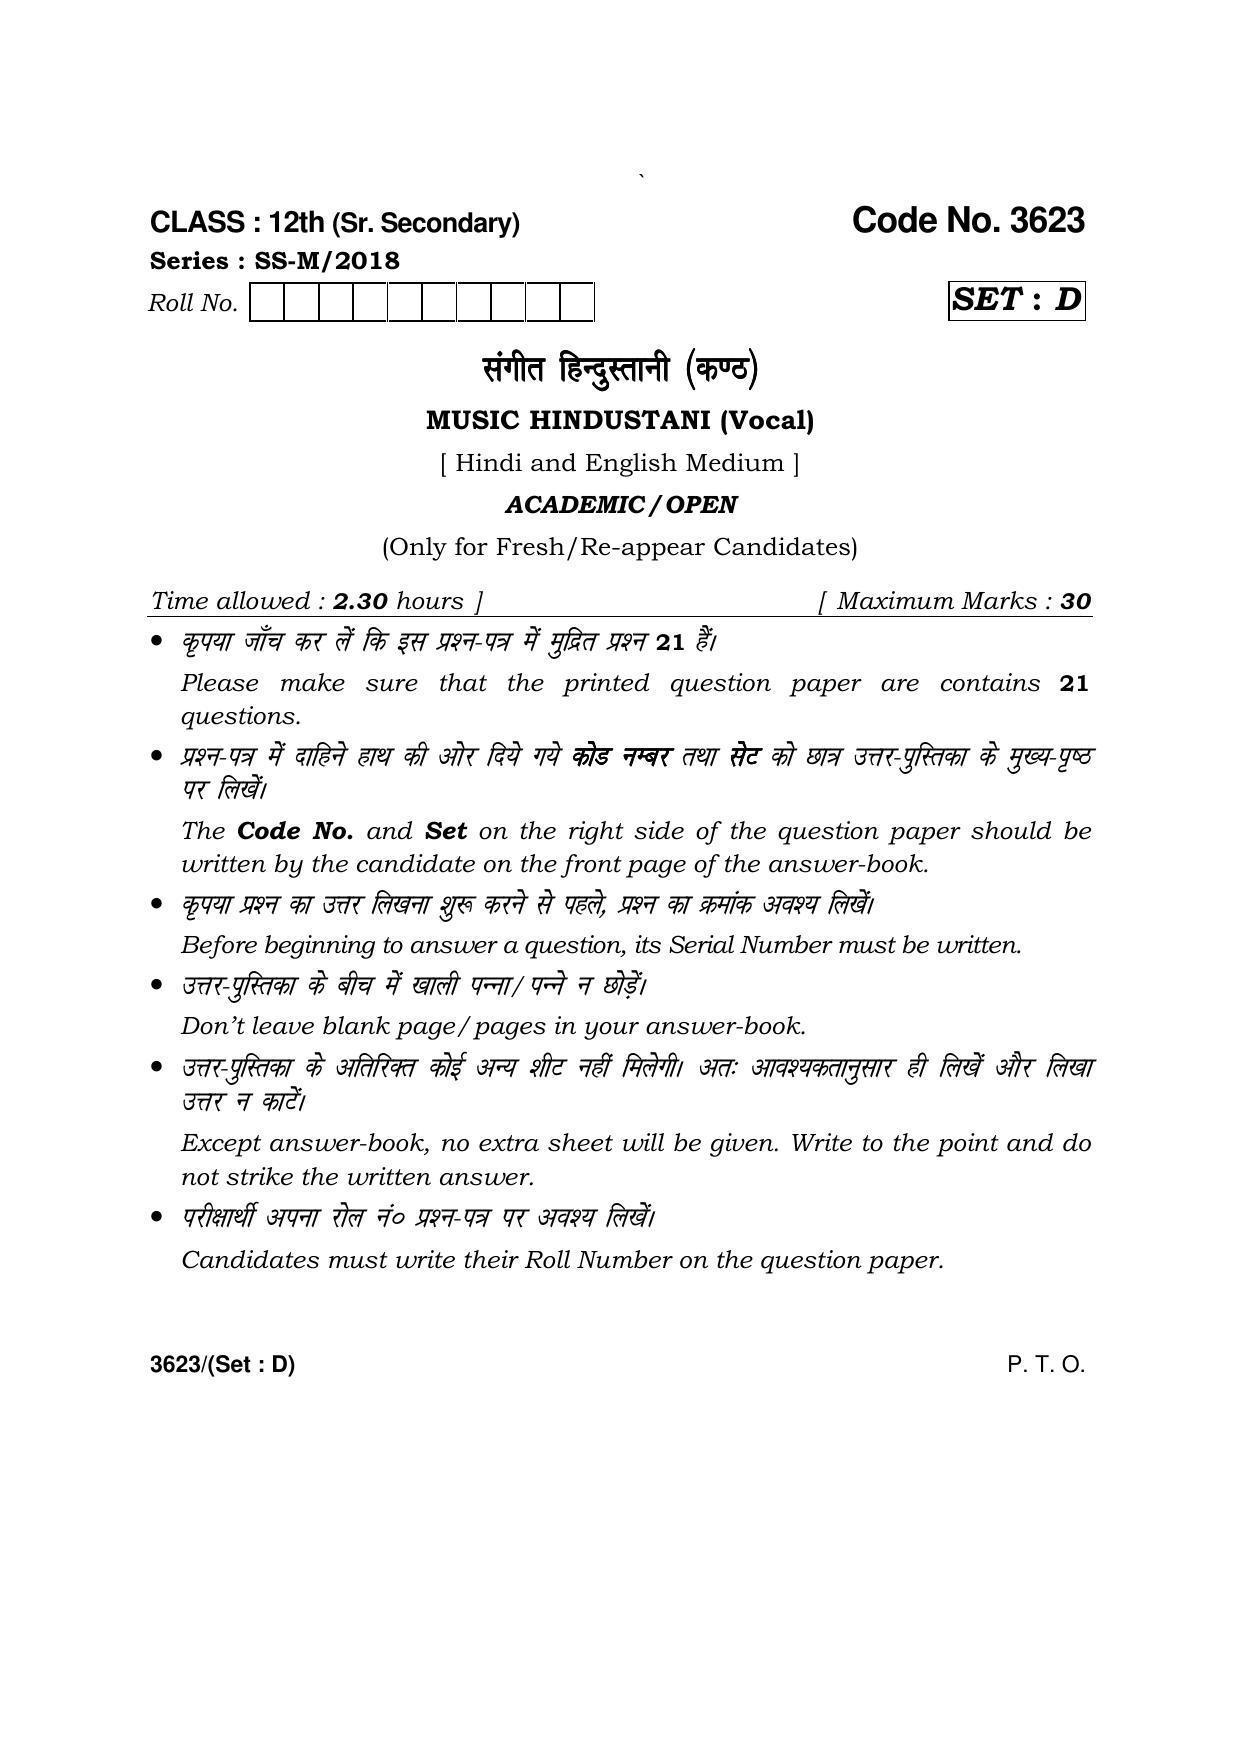 Haryana Board HBSE Class 12 Music Hindustani (Vocal) -D 2018 Question Paper - Page 1